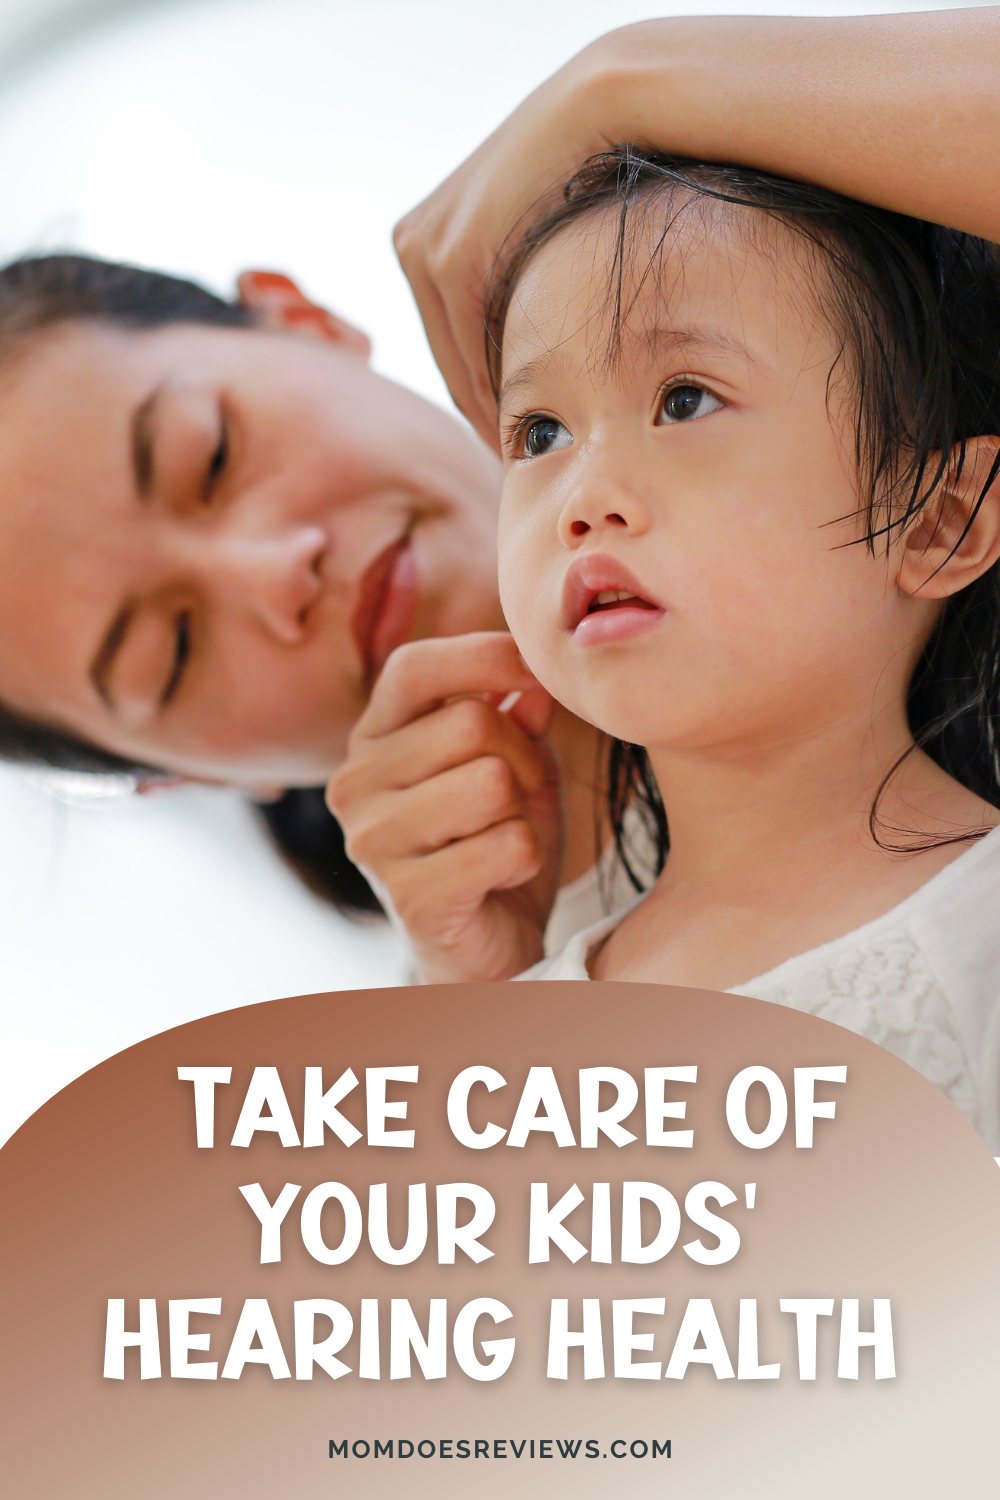 How To Help Take Care Of Your Kids' Hearing Health